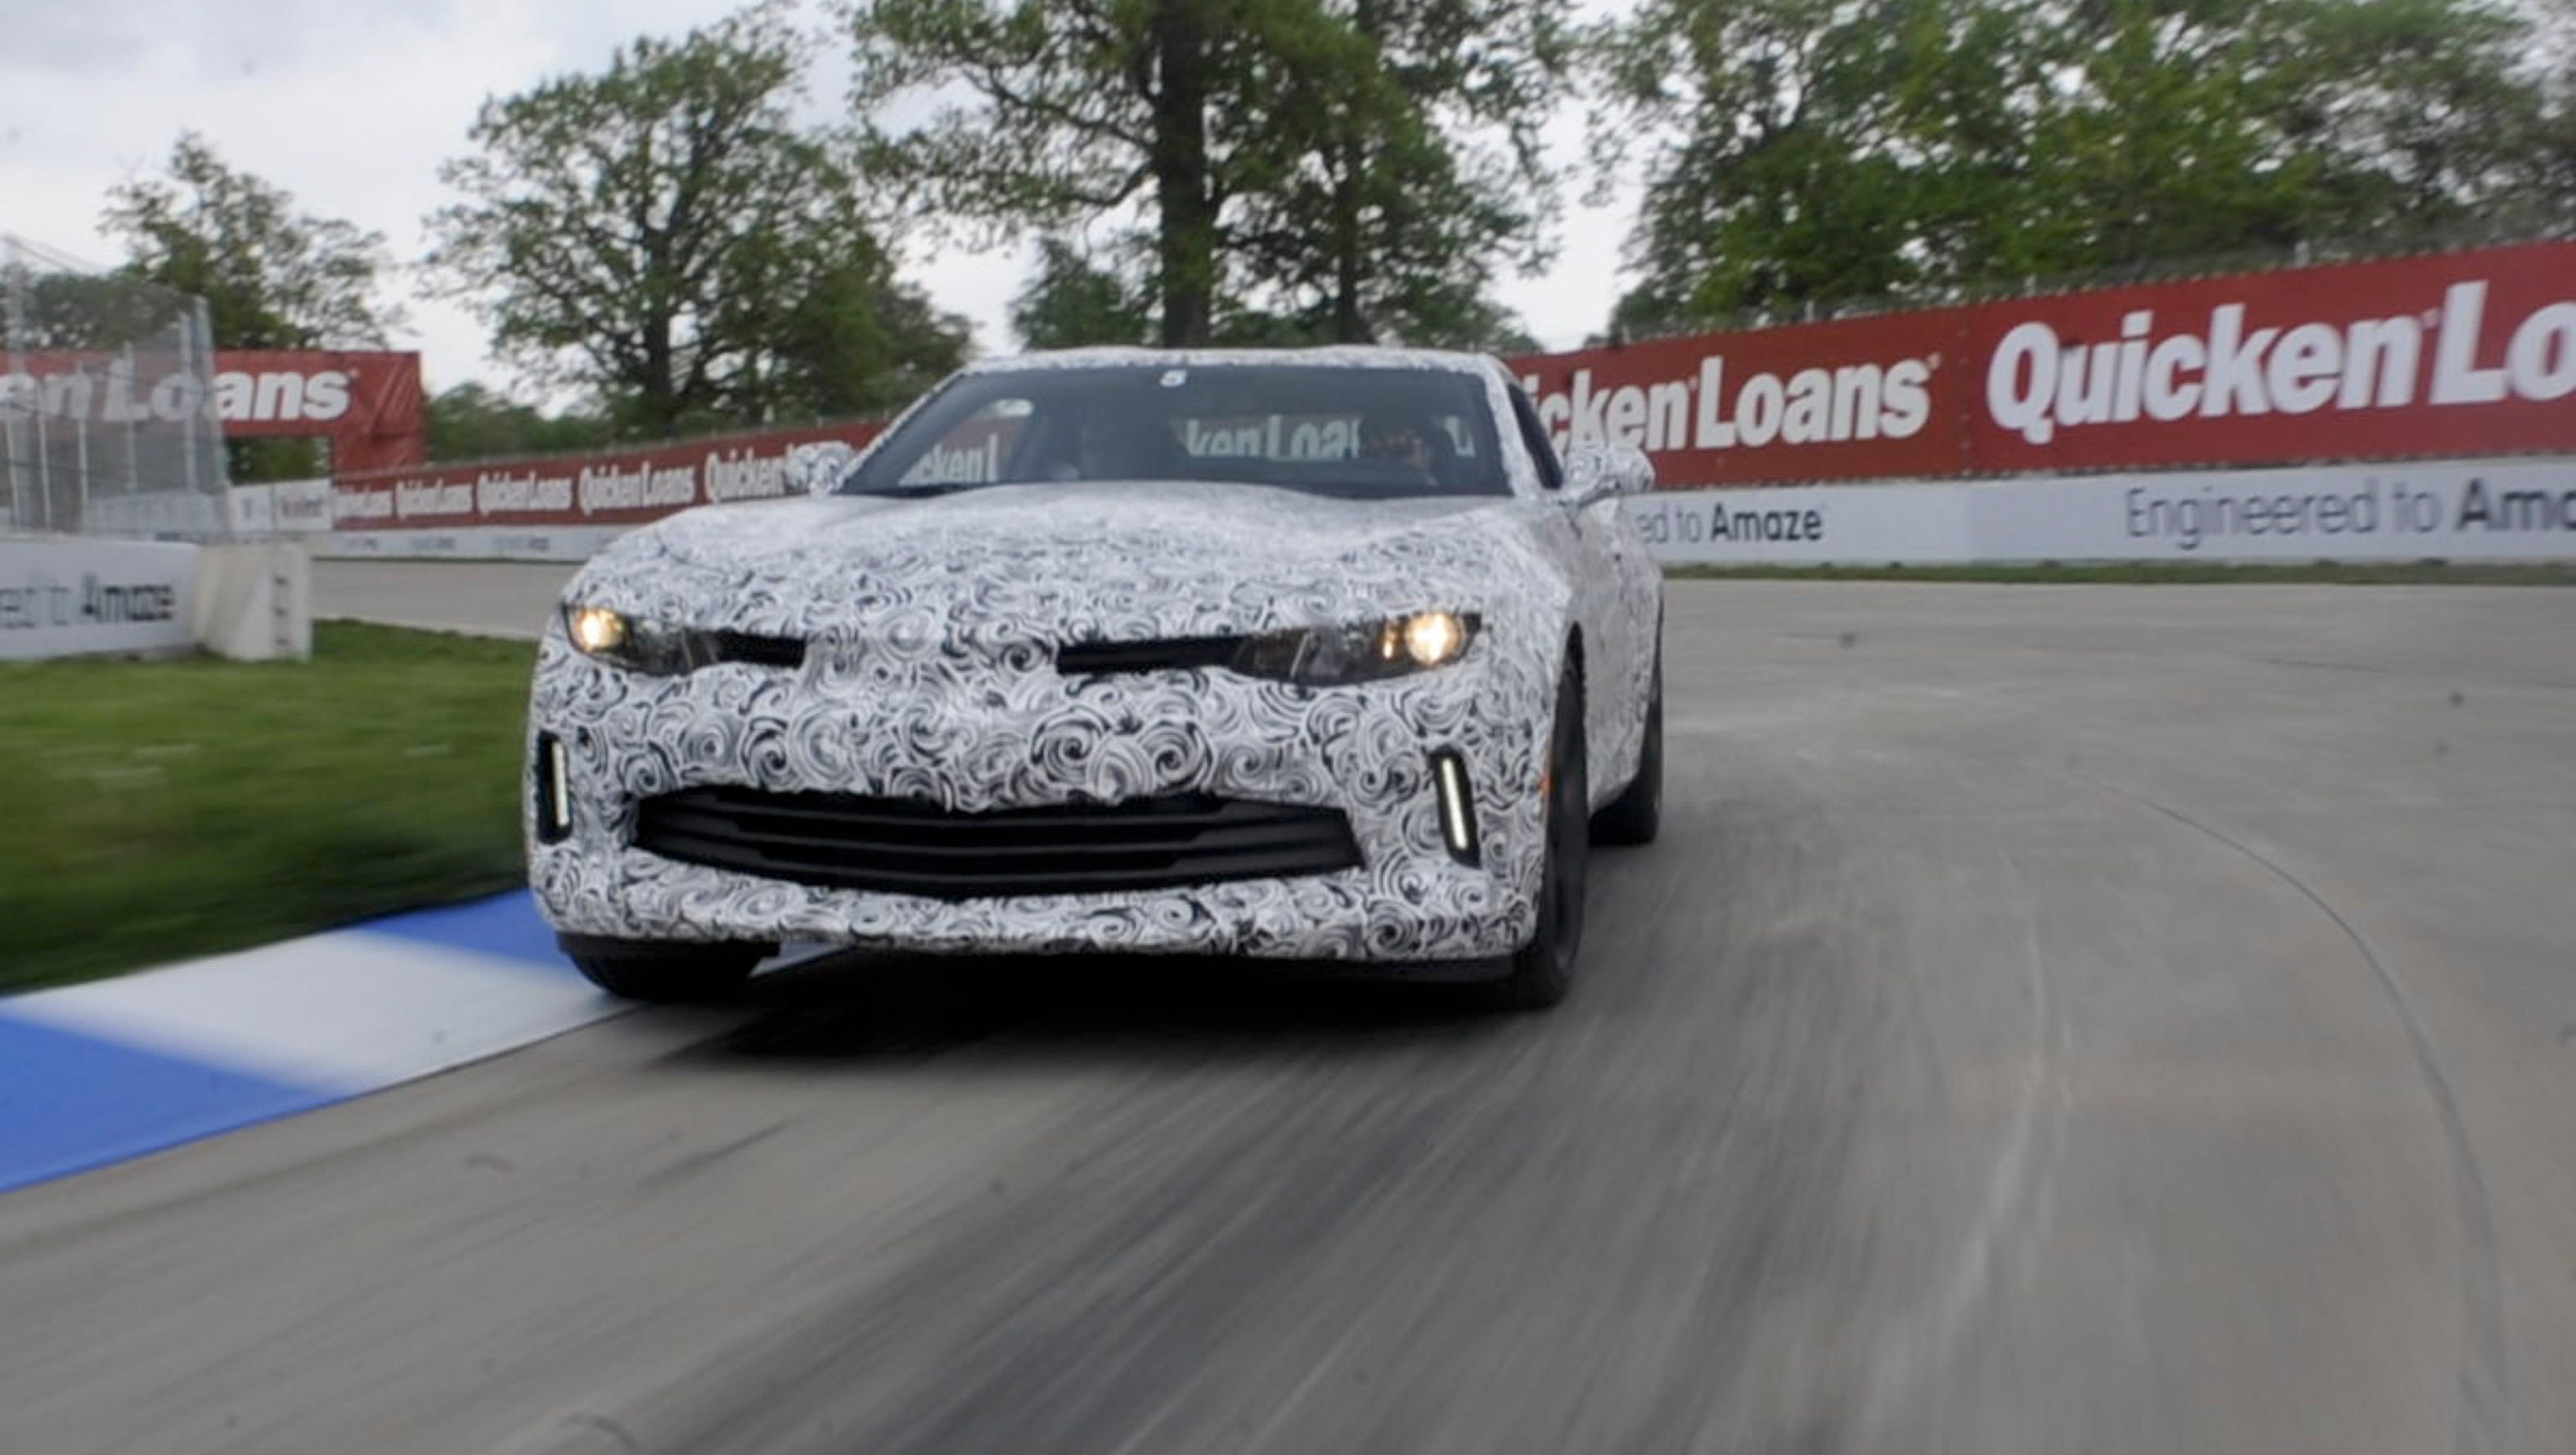 The 2016 Camaro mule car takes a corner, Sunday May 17, 2015, during a test day with the new Chevrolet Camaro on the Grand Prix track at Belle Isle in Detroit.